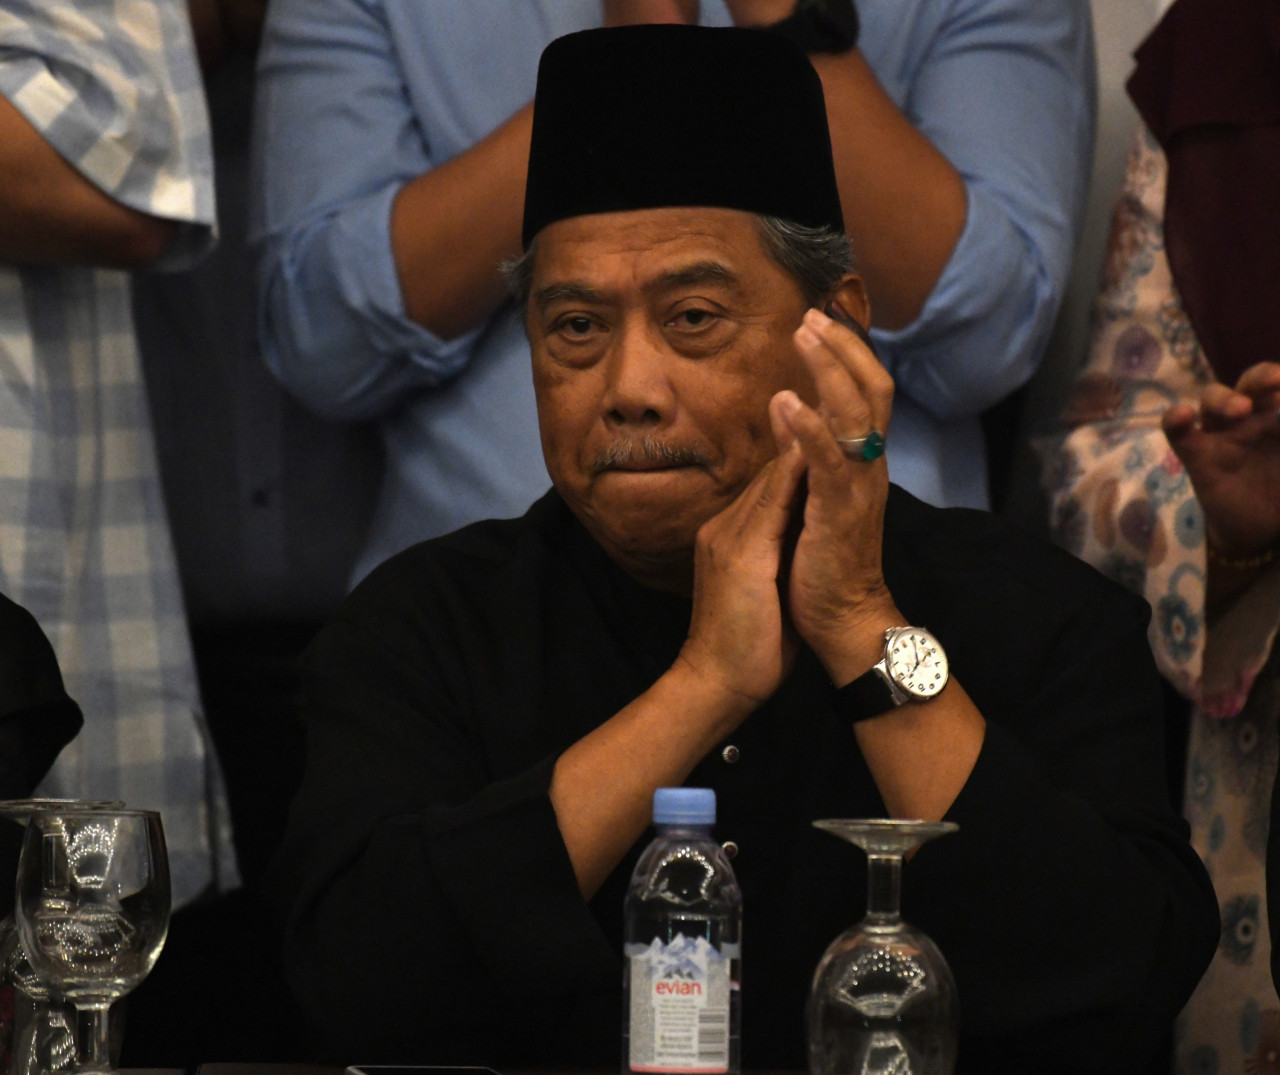 Datuk Seri Najib Razak had sacked former Umno deputy president Tan Sri Muhyiddin Yassin and vice-president Datuk Seri Mohd Shafie Apdal over their constant criticism of 1MDB, in an attempt to quell dissent within Umno and stamp his authority on the party. – AFP pic, September 14, 2021